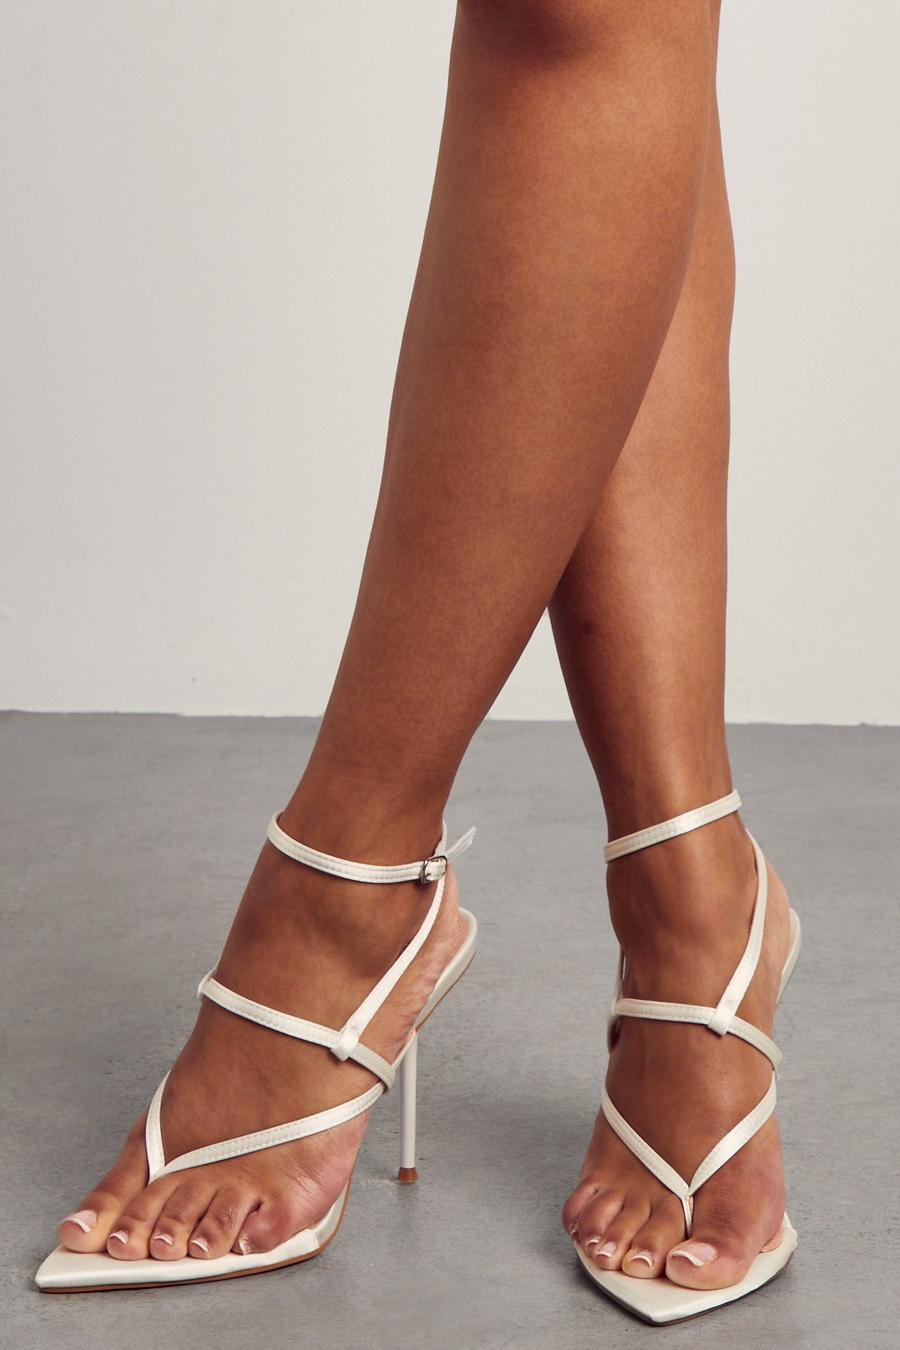 Ivory white Satin Pointed Strappy High Heels